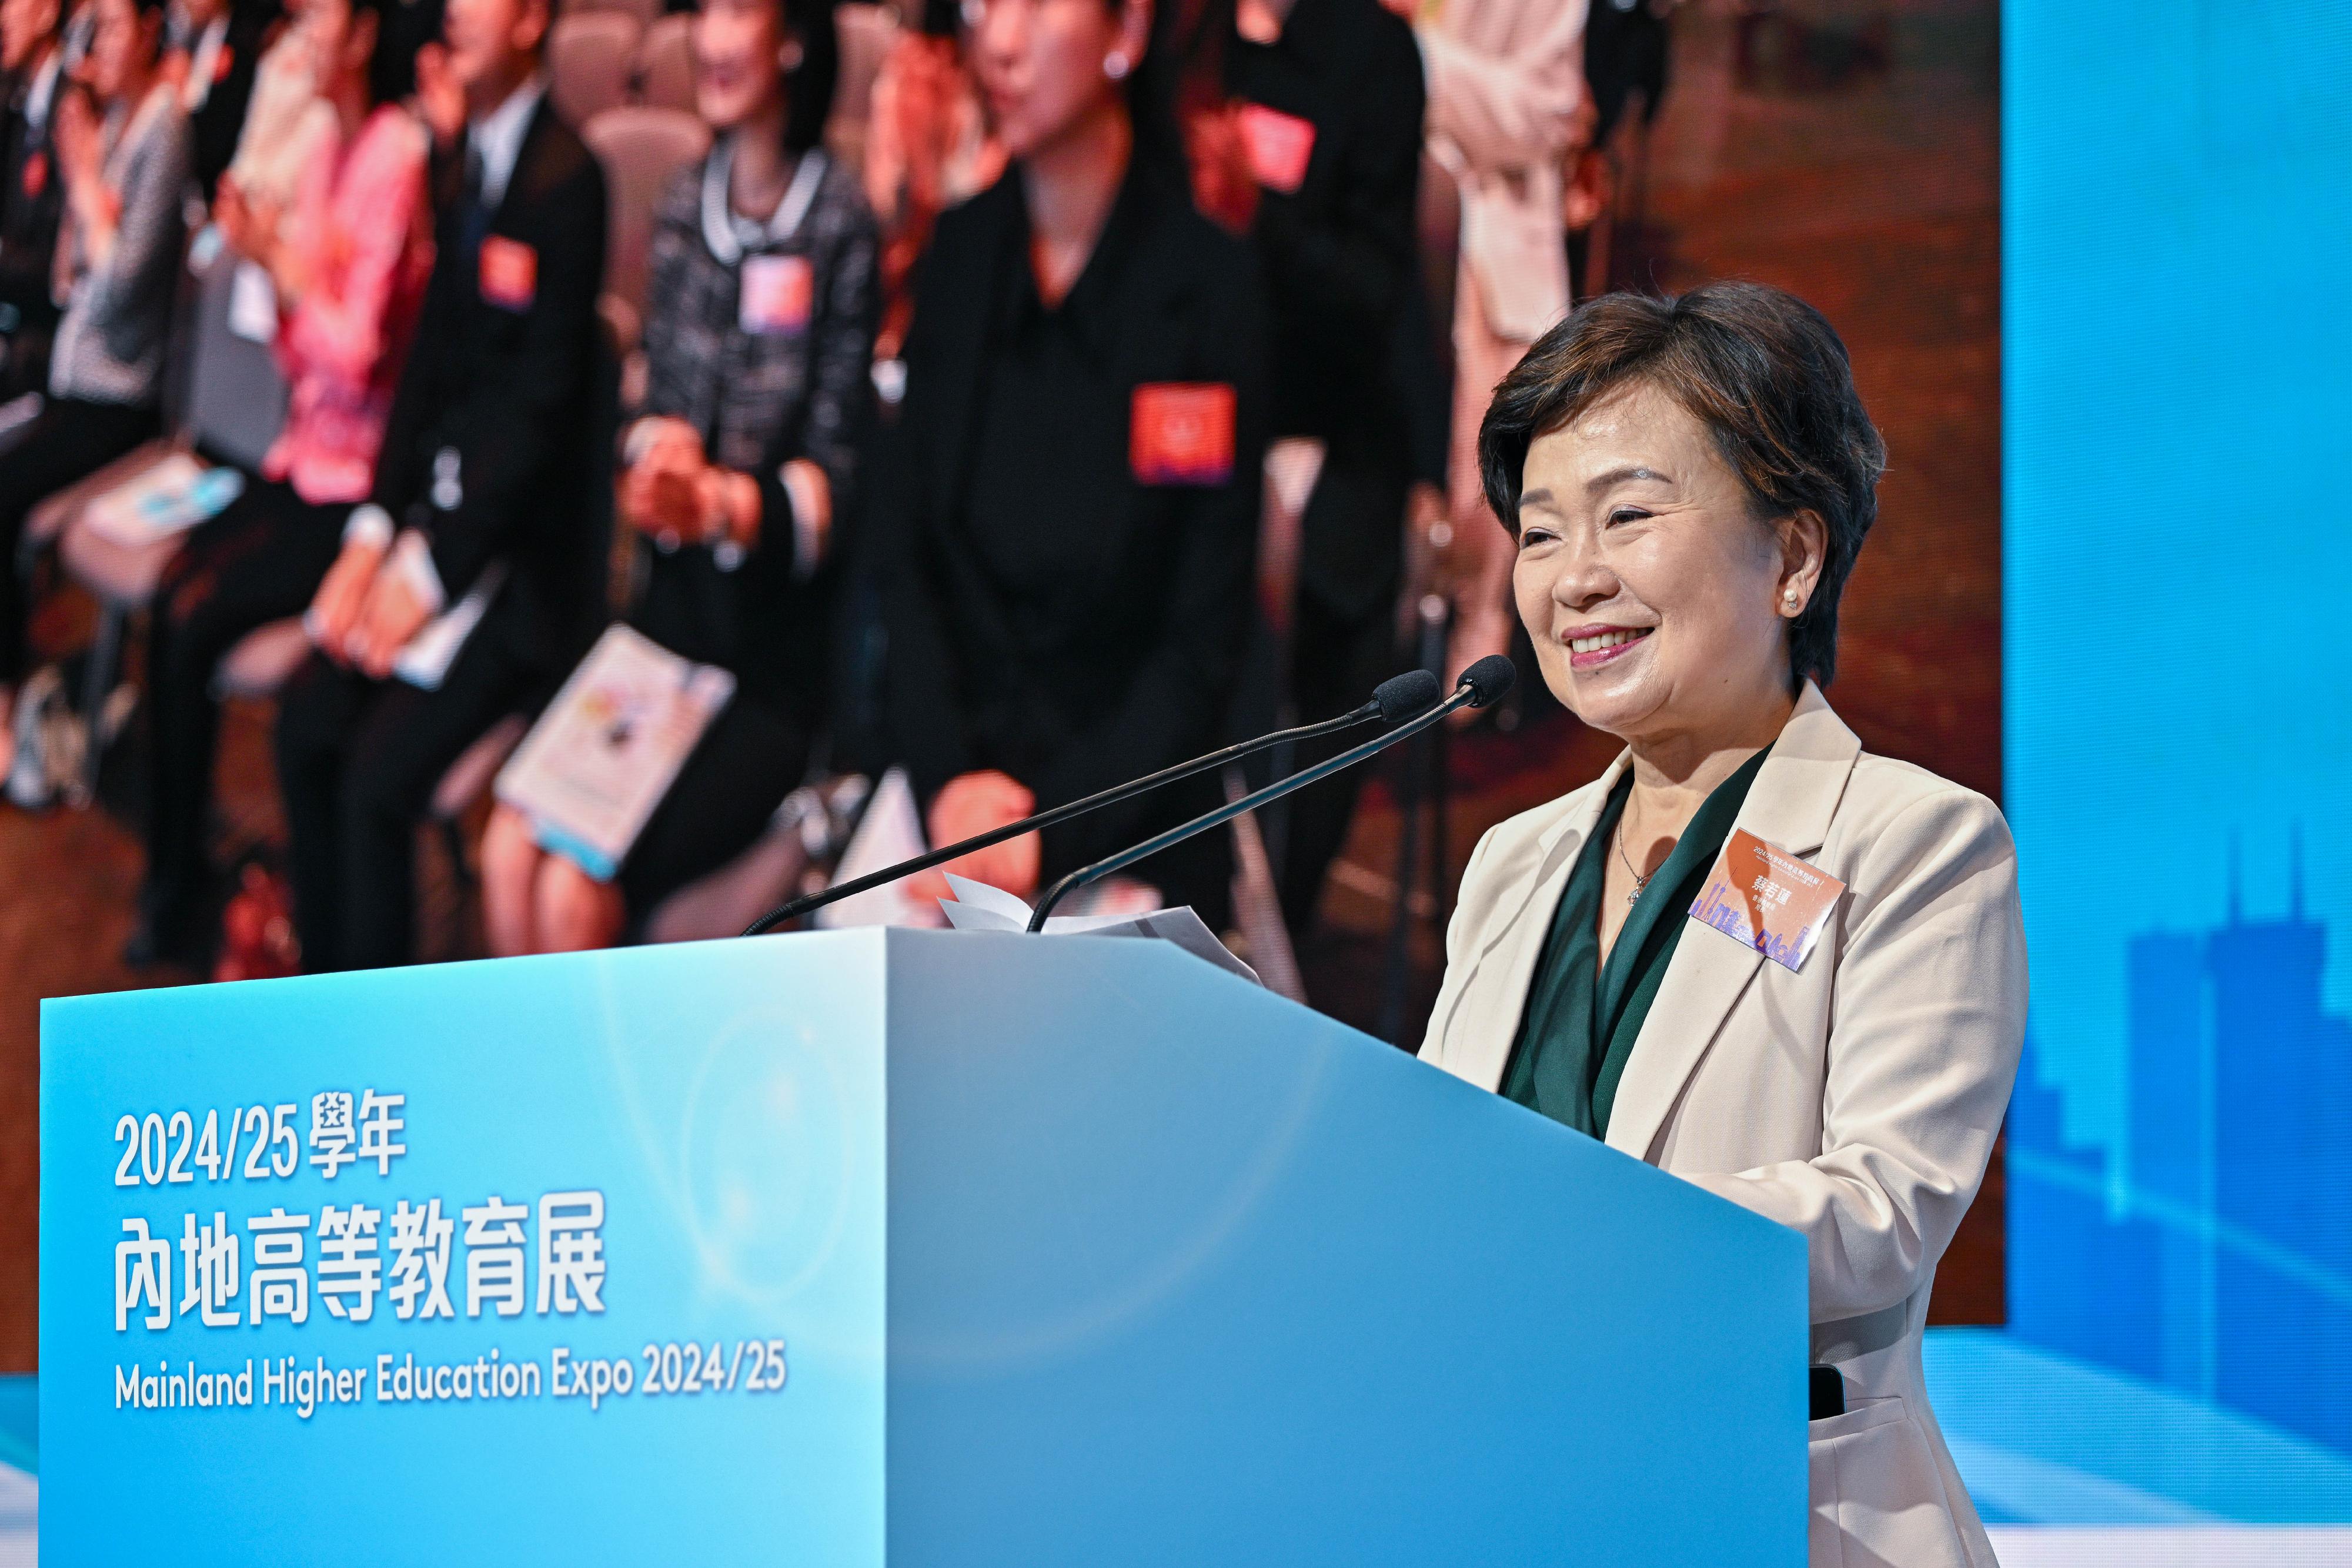 The Mainland Higher Education Expo 2024/25, jointly organised by the Ministry of Education and the Education Bureau, is being held today and tomorrow (December 2 and 3) at the Hong Kong Convention and Exhibition Centre in Wan Chai. Photo shows the Secretary for Education, Dr Choi Yuk-lin, speaking at the opening ceremony.